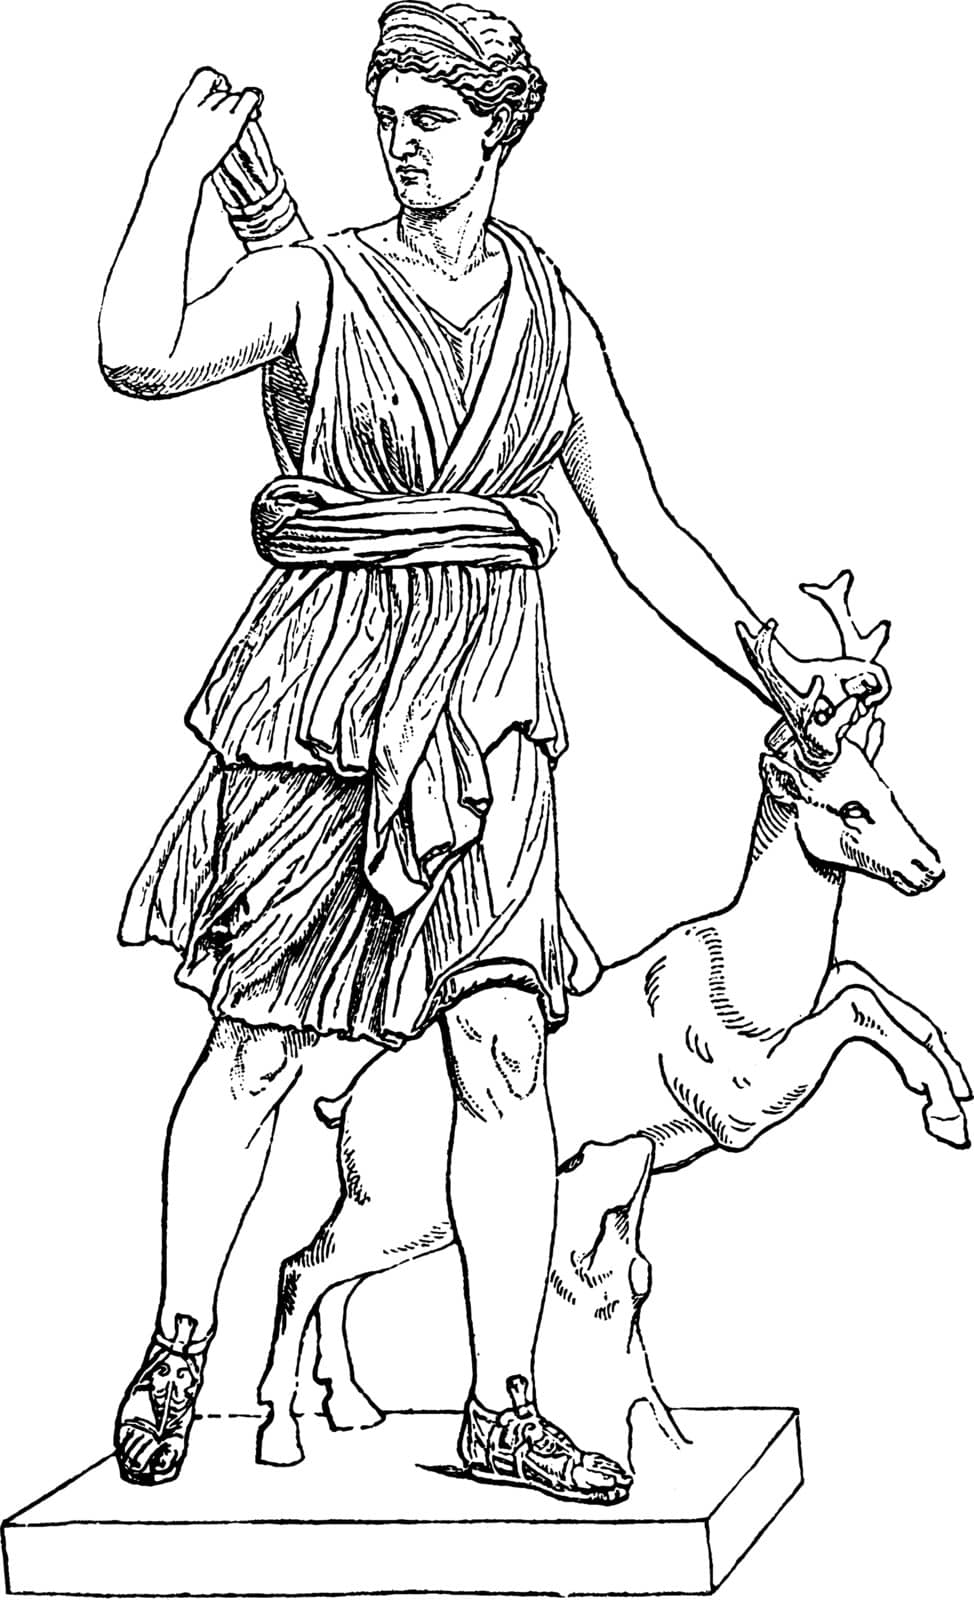 Portrait of Artemis, goddess of hunting holding a deer with one hand and her other hand is on arrows, vintage line drawing or engraving illustration.